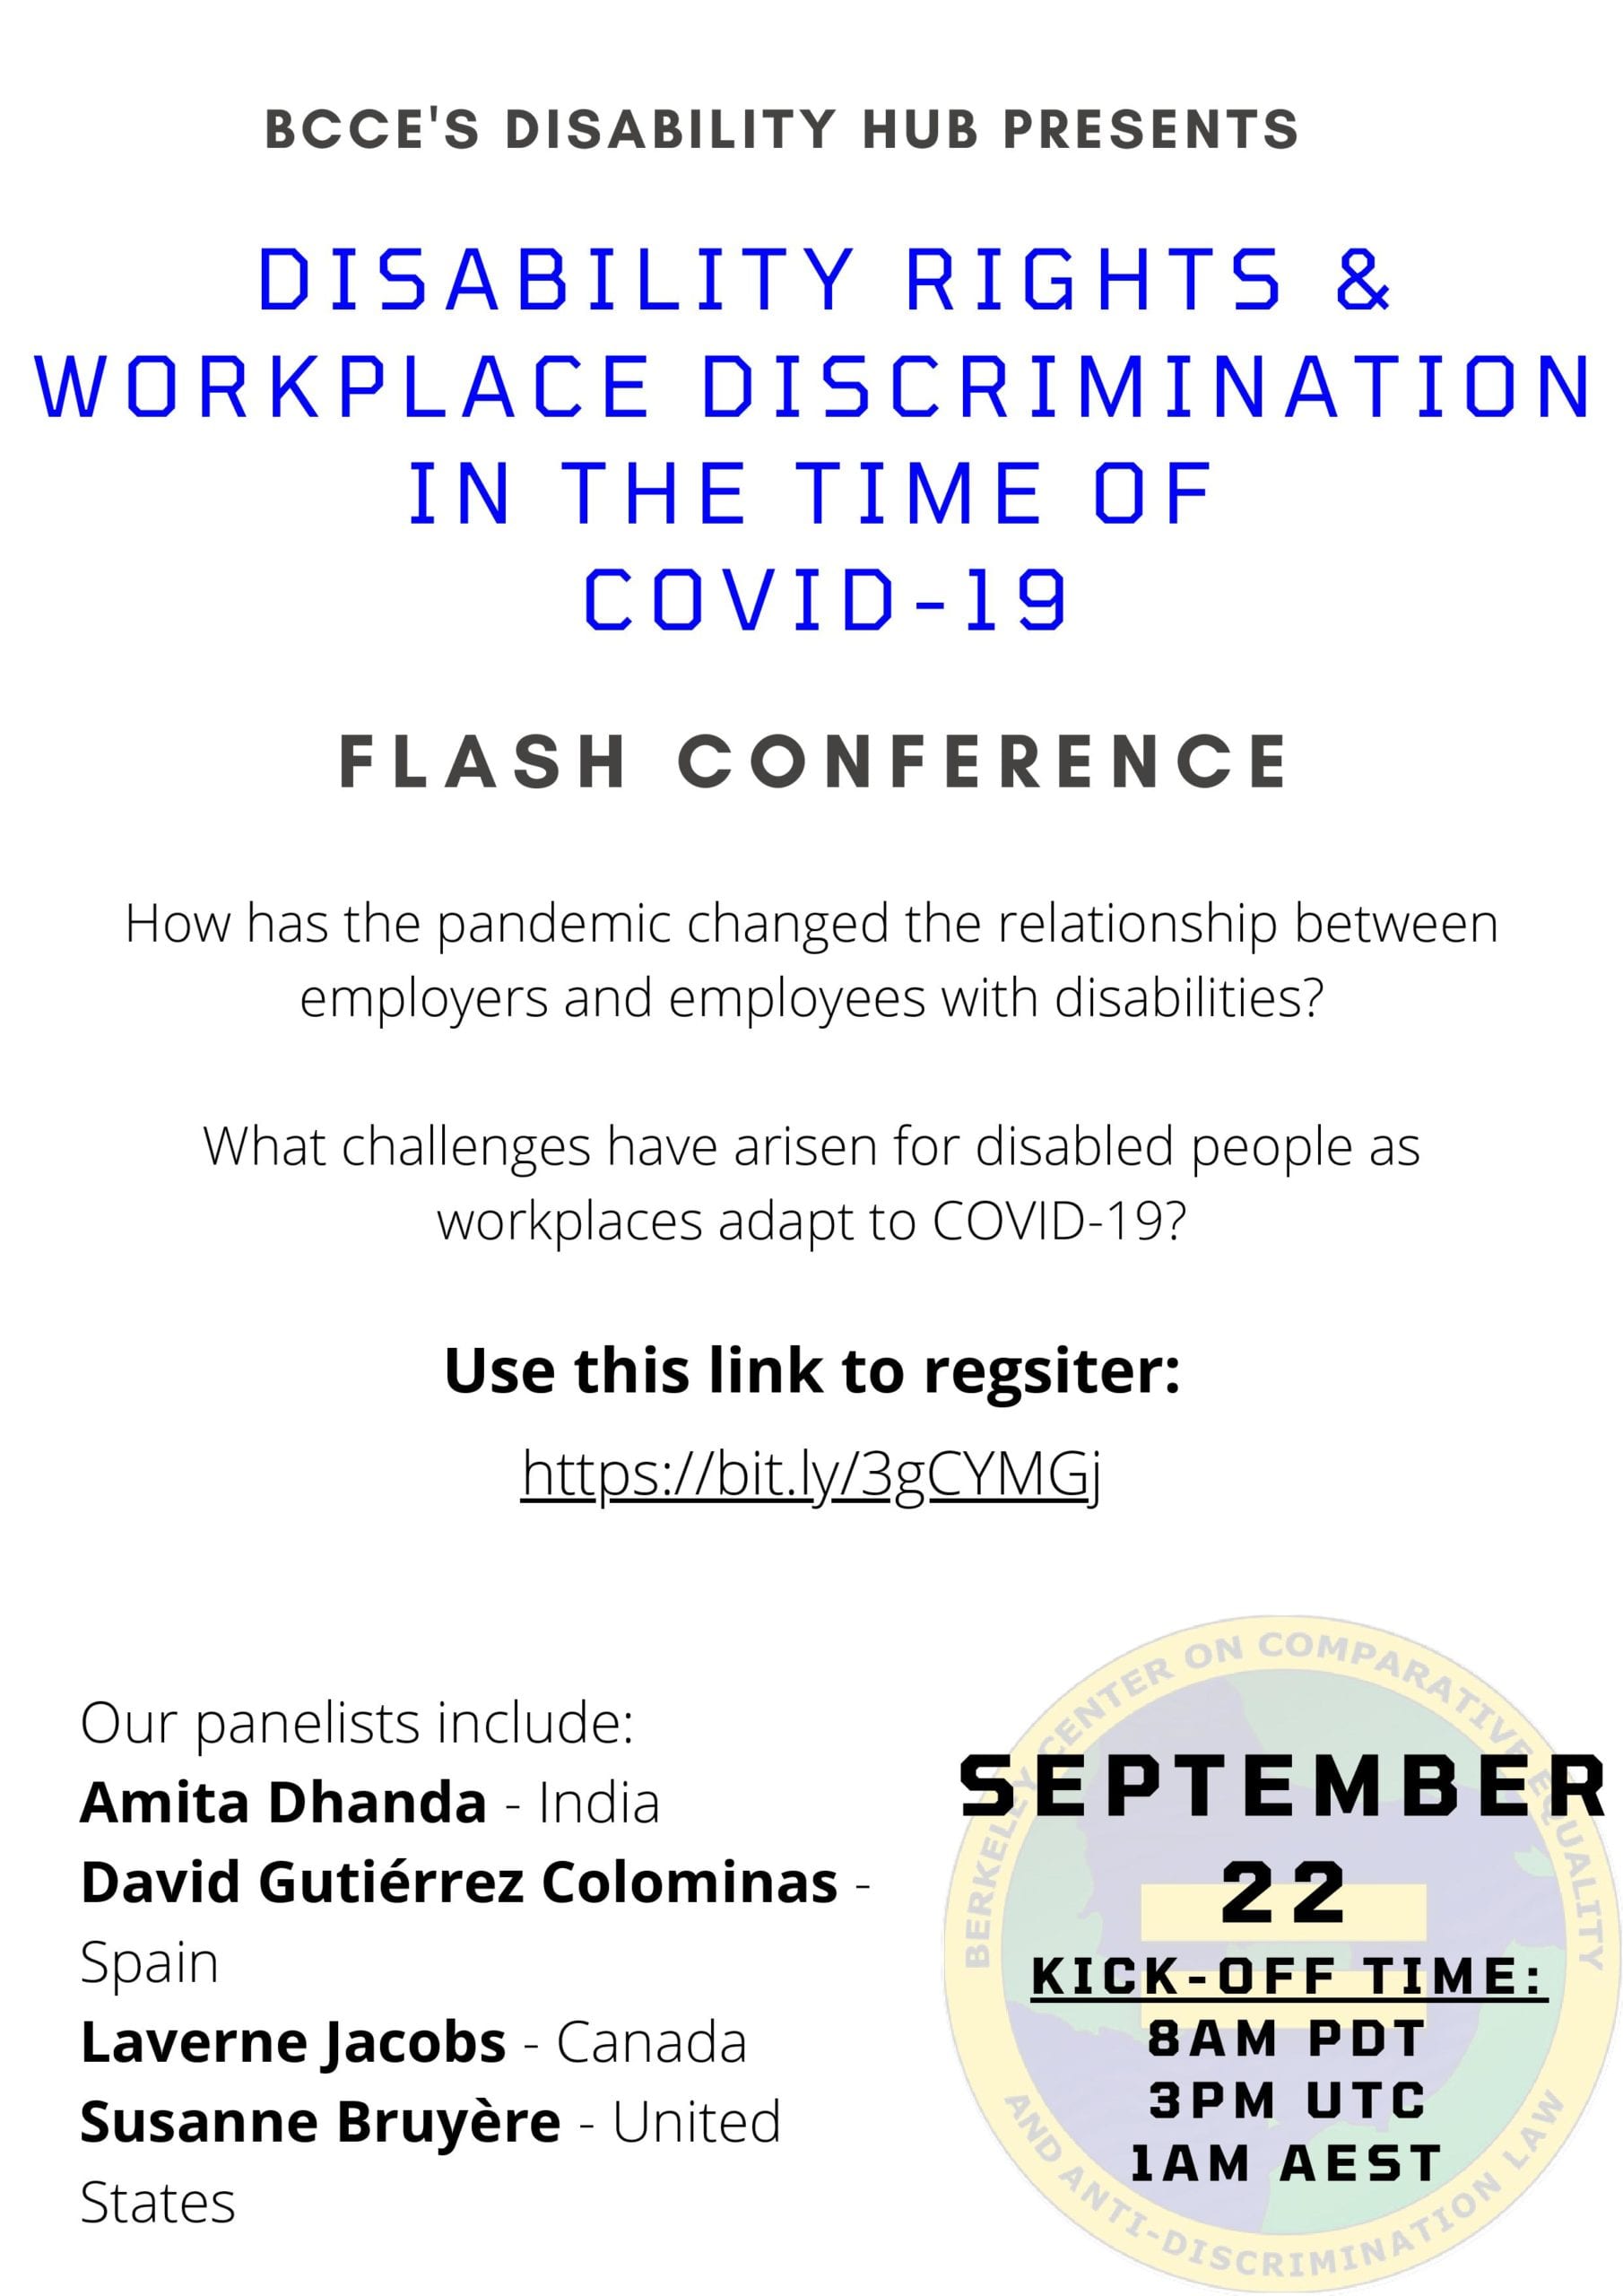 Disability Rights & Workplace Discrimination in the Time of COVID-19 Flash Conference Infographic